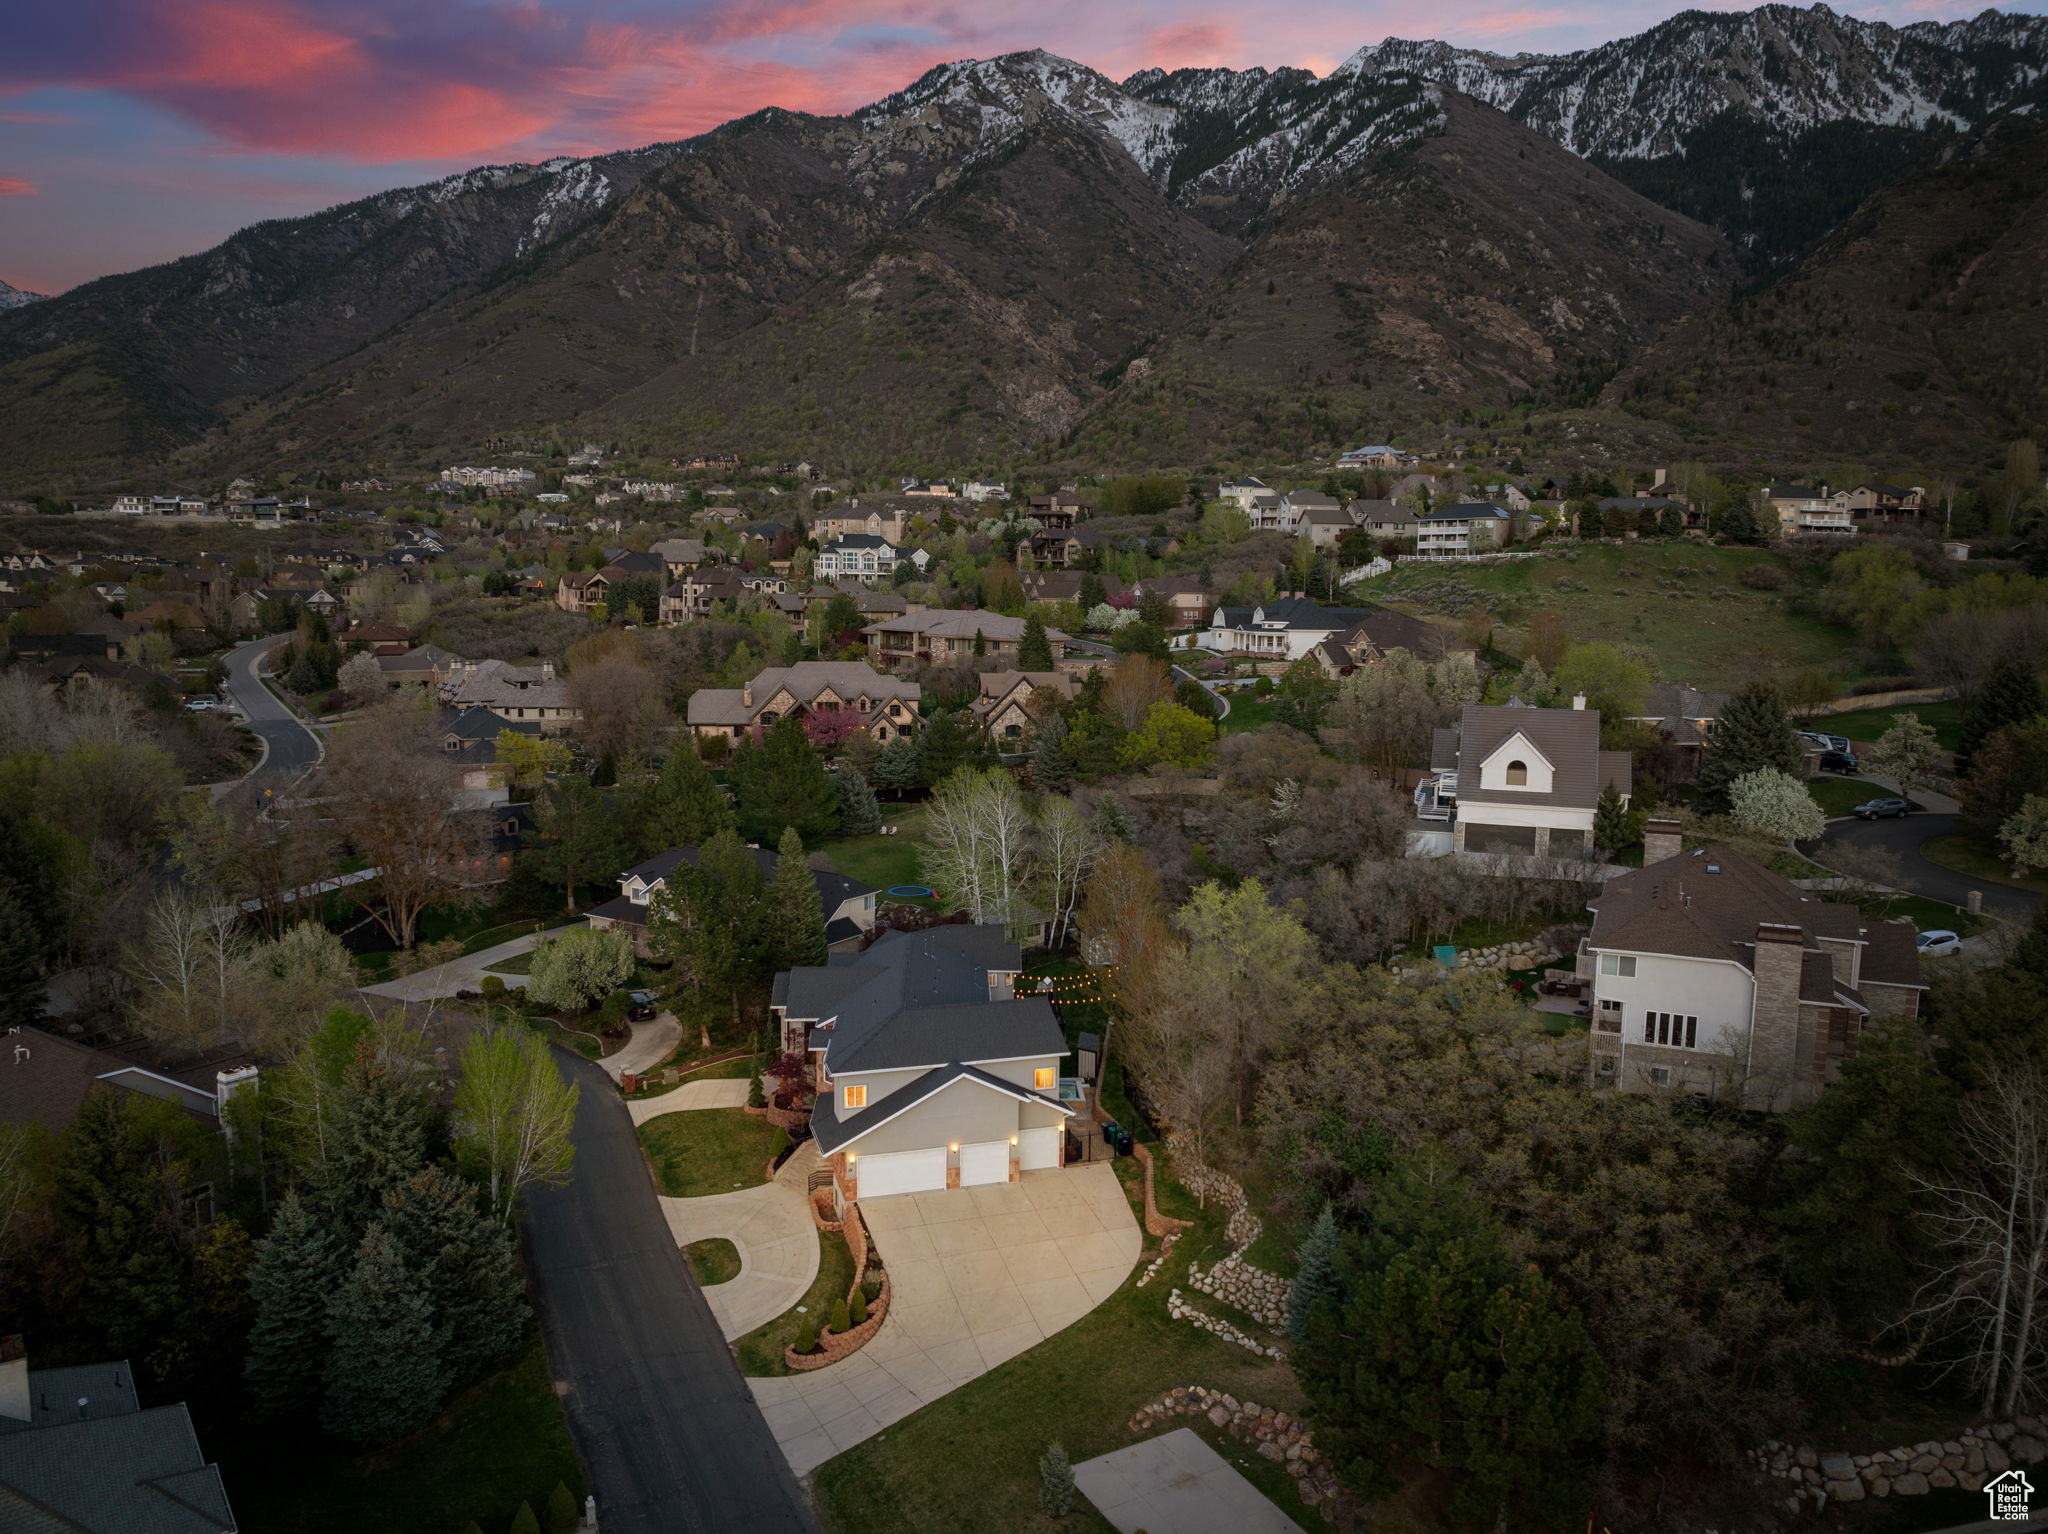 Aerial view at dusk with a mountain view